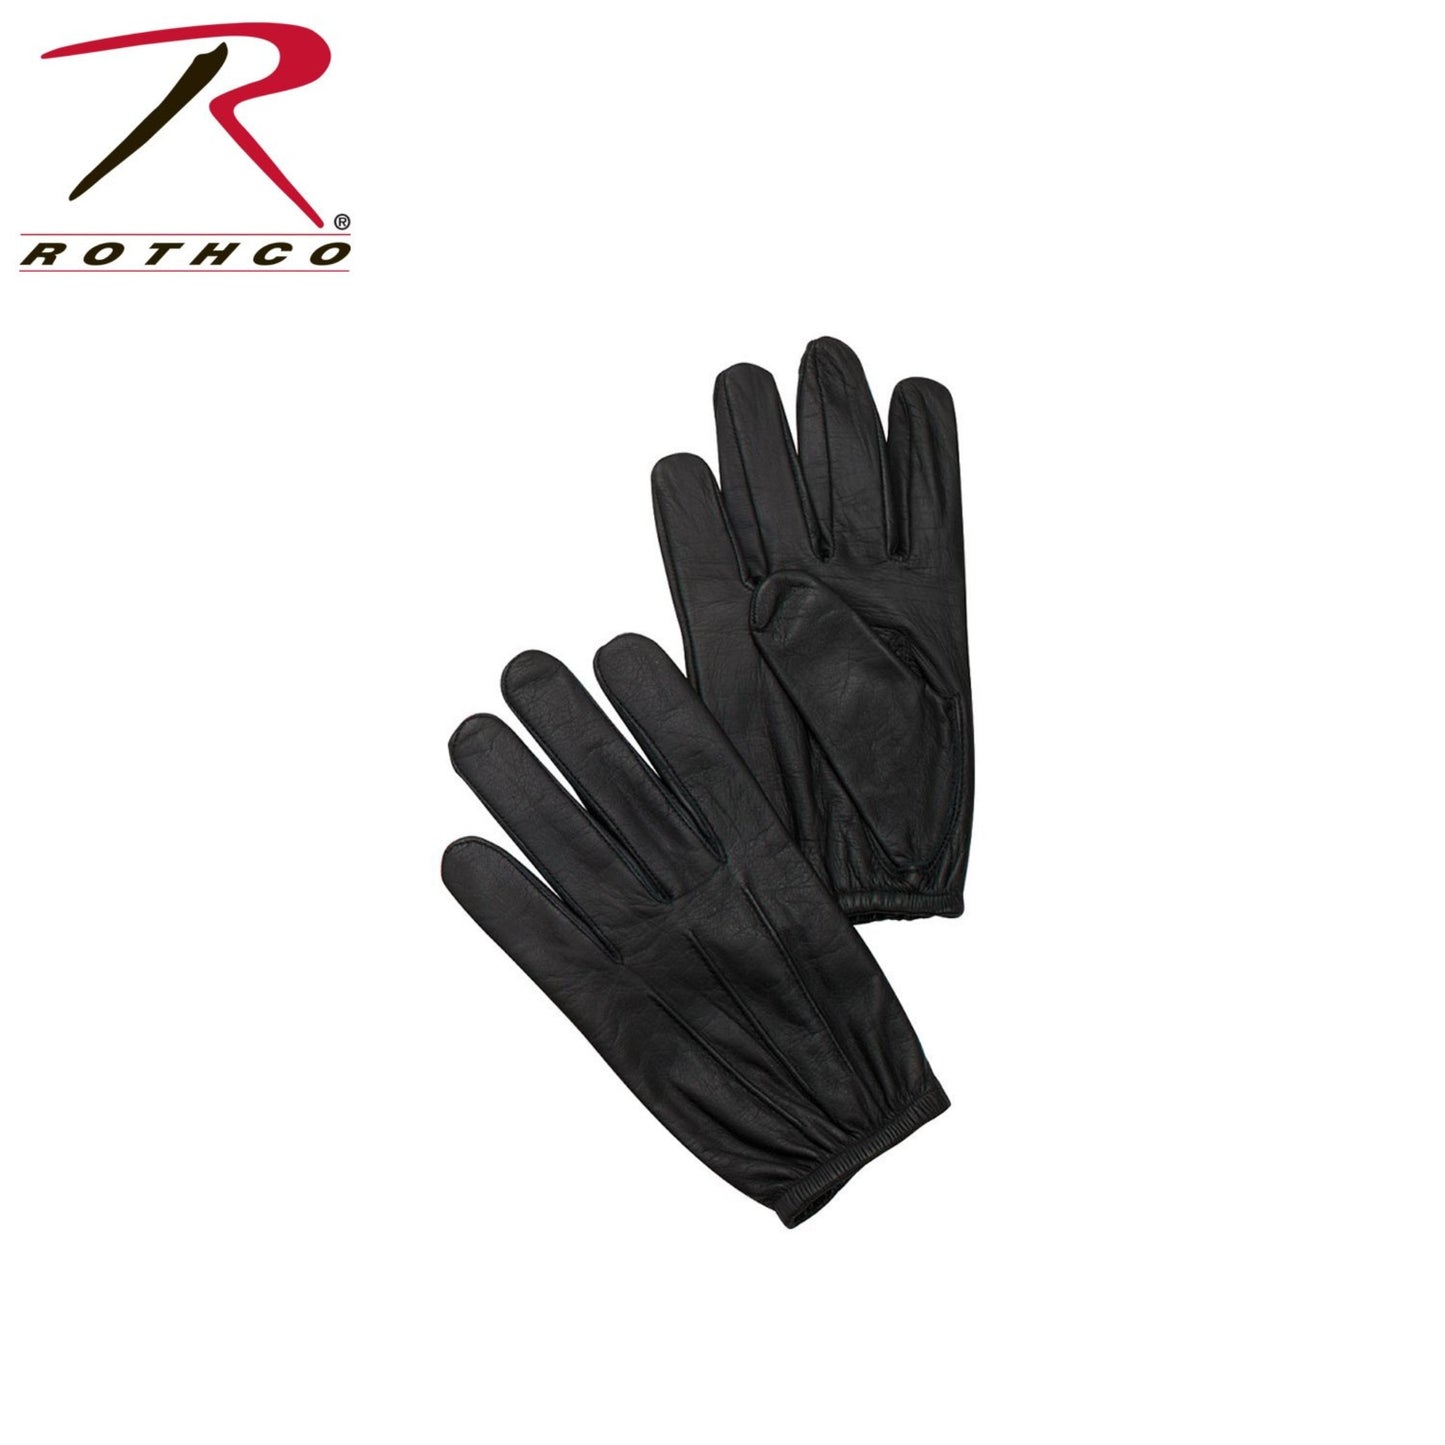 Police Duty Search Gloves